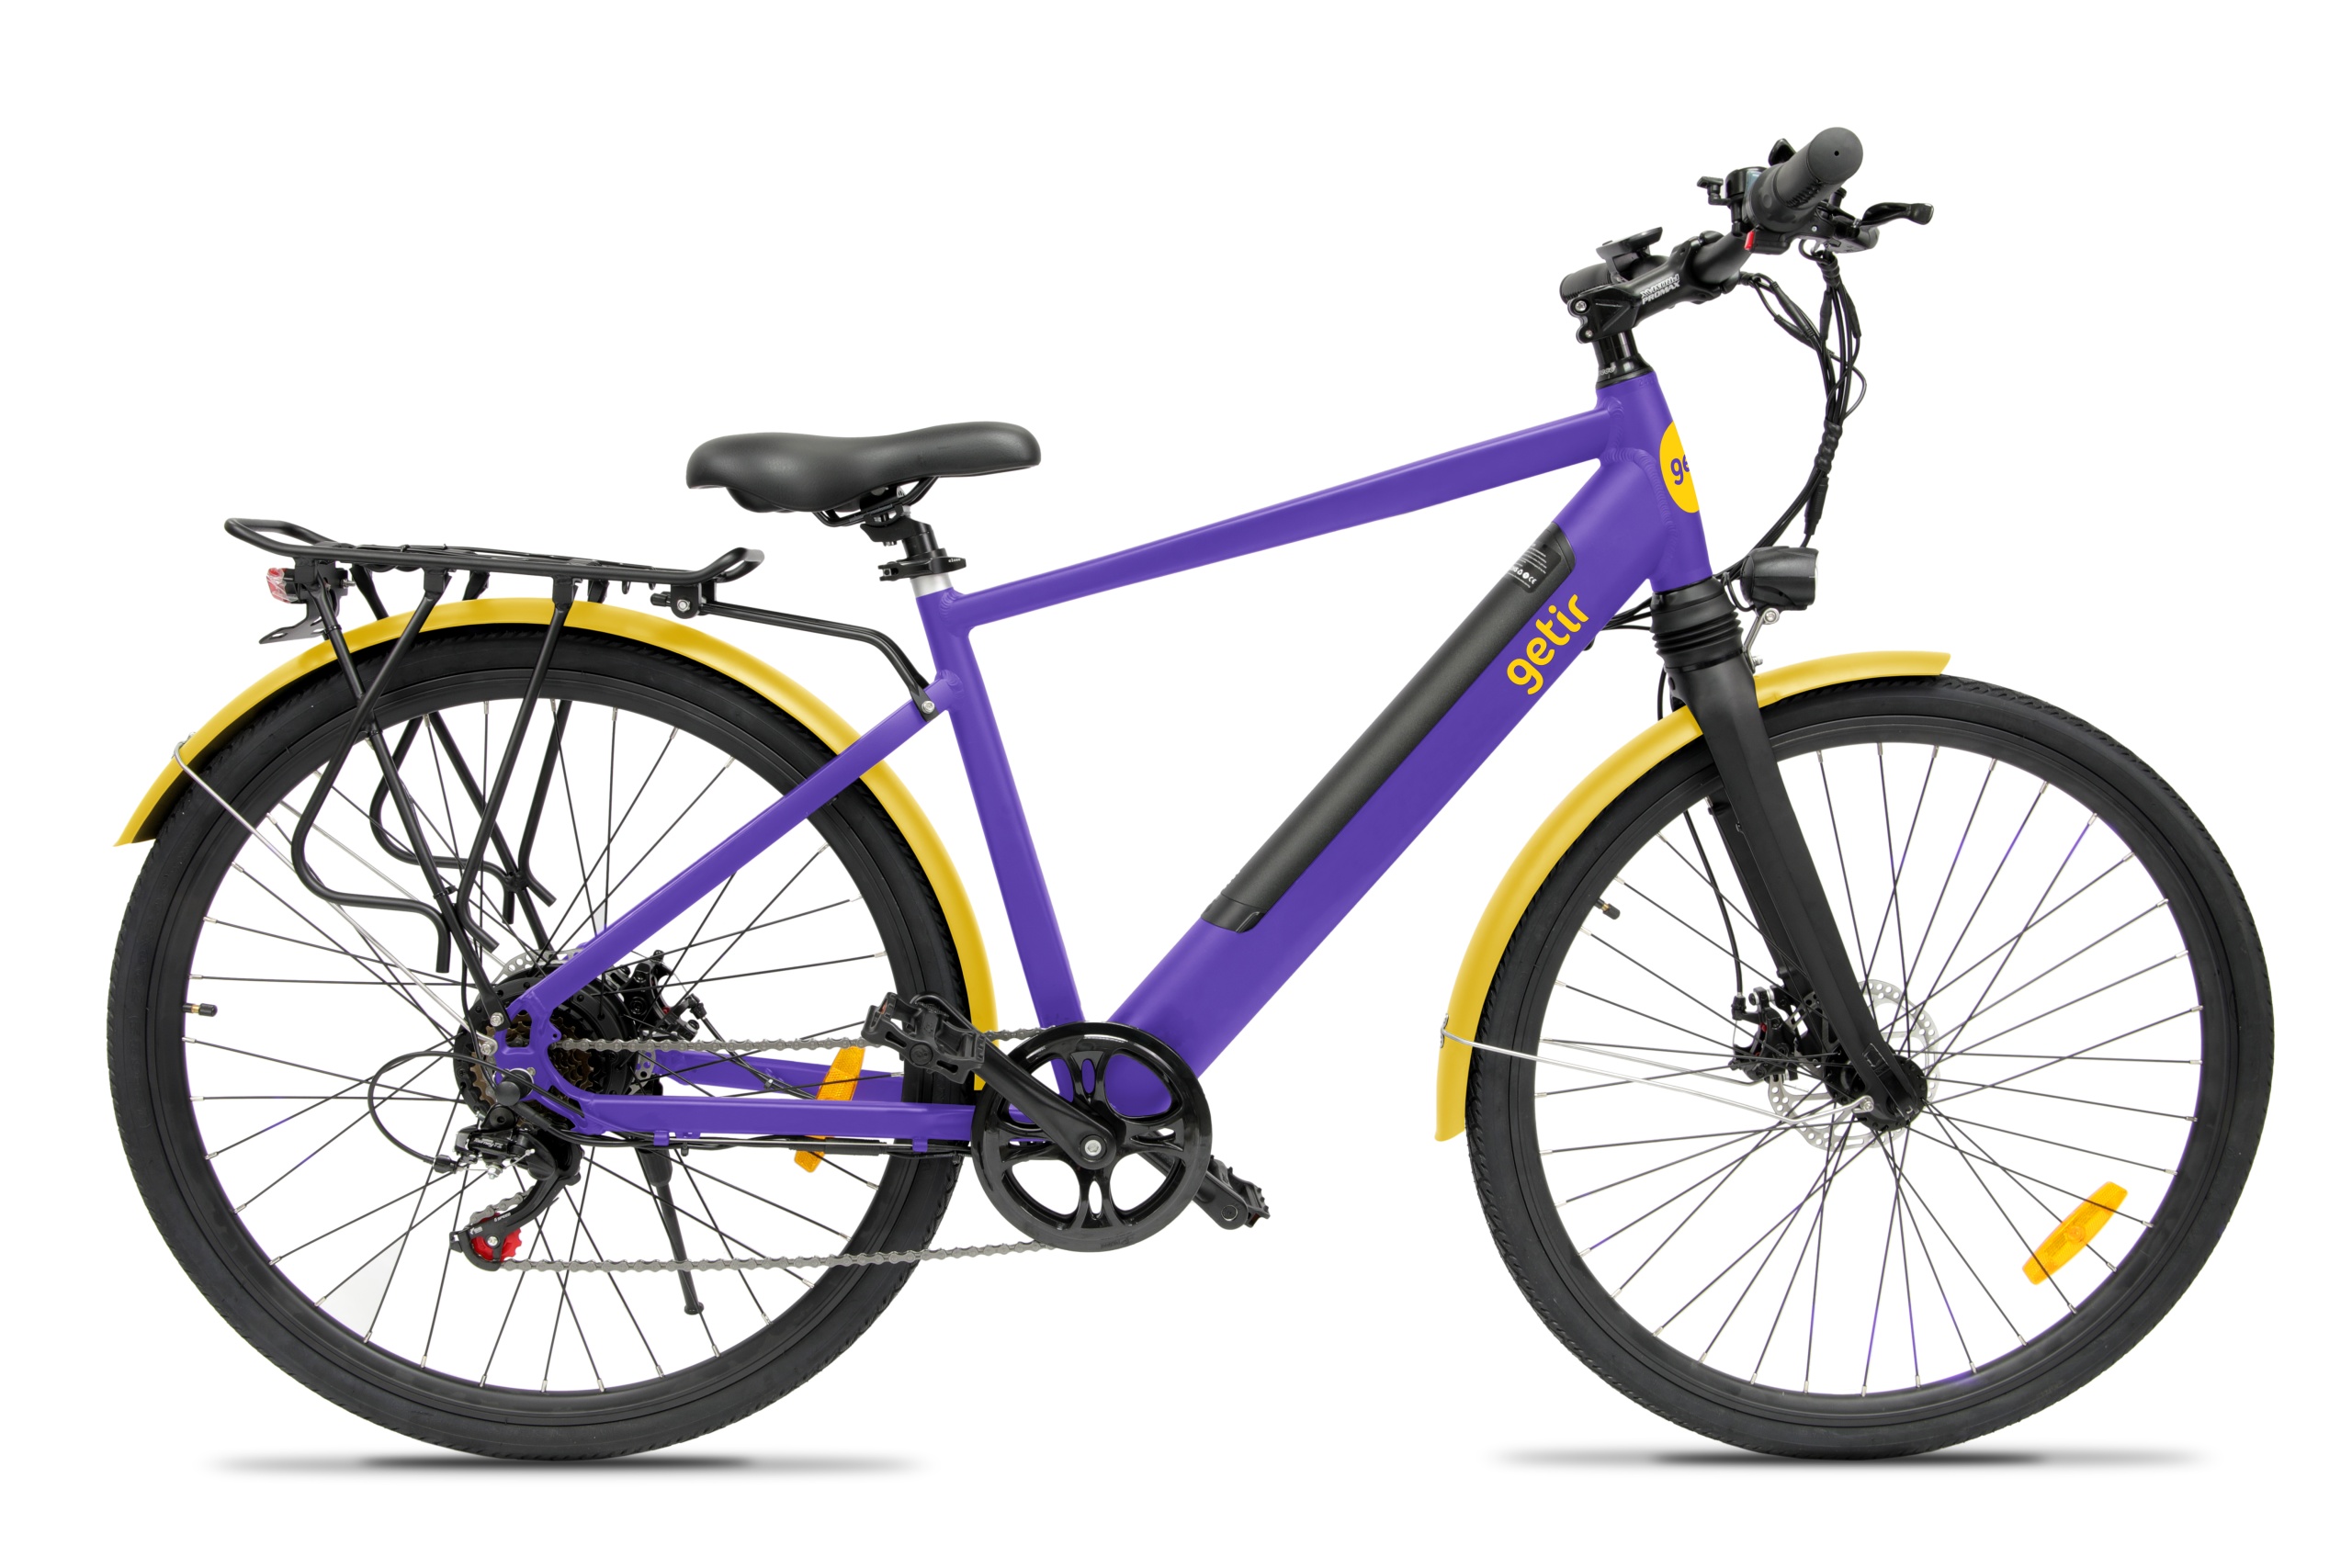 Getir eBike by Deliver-E